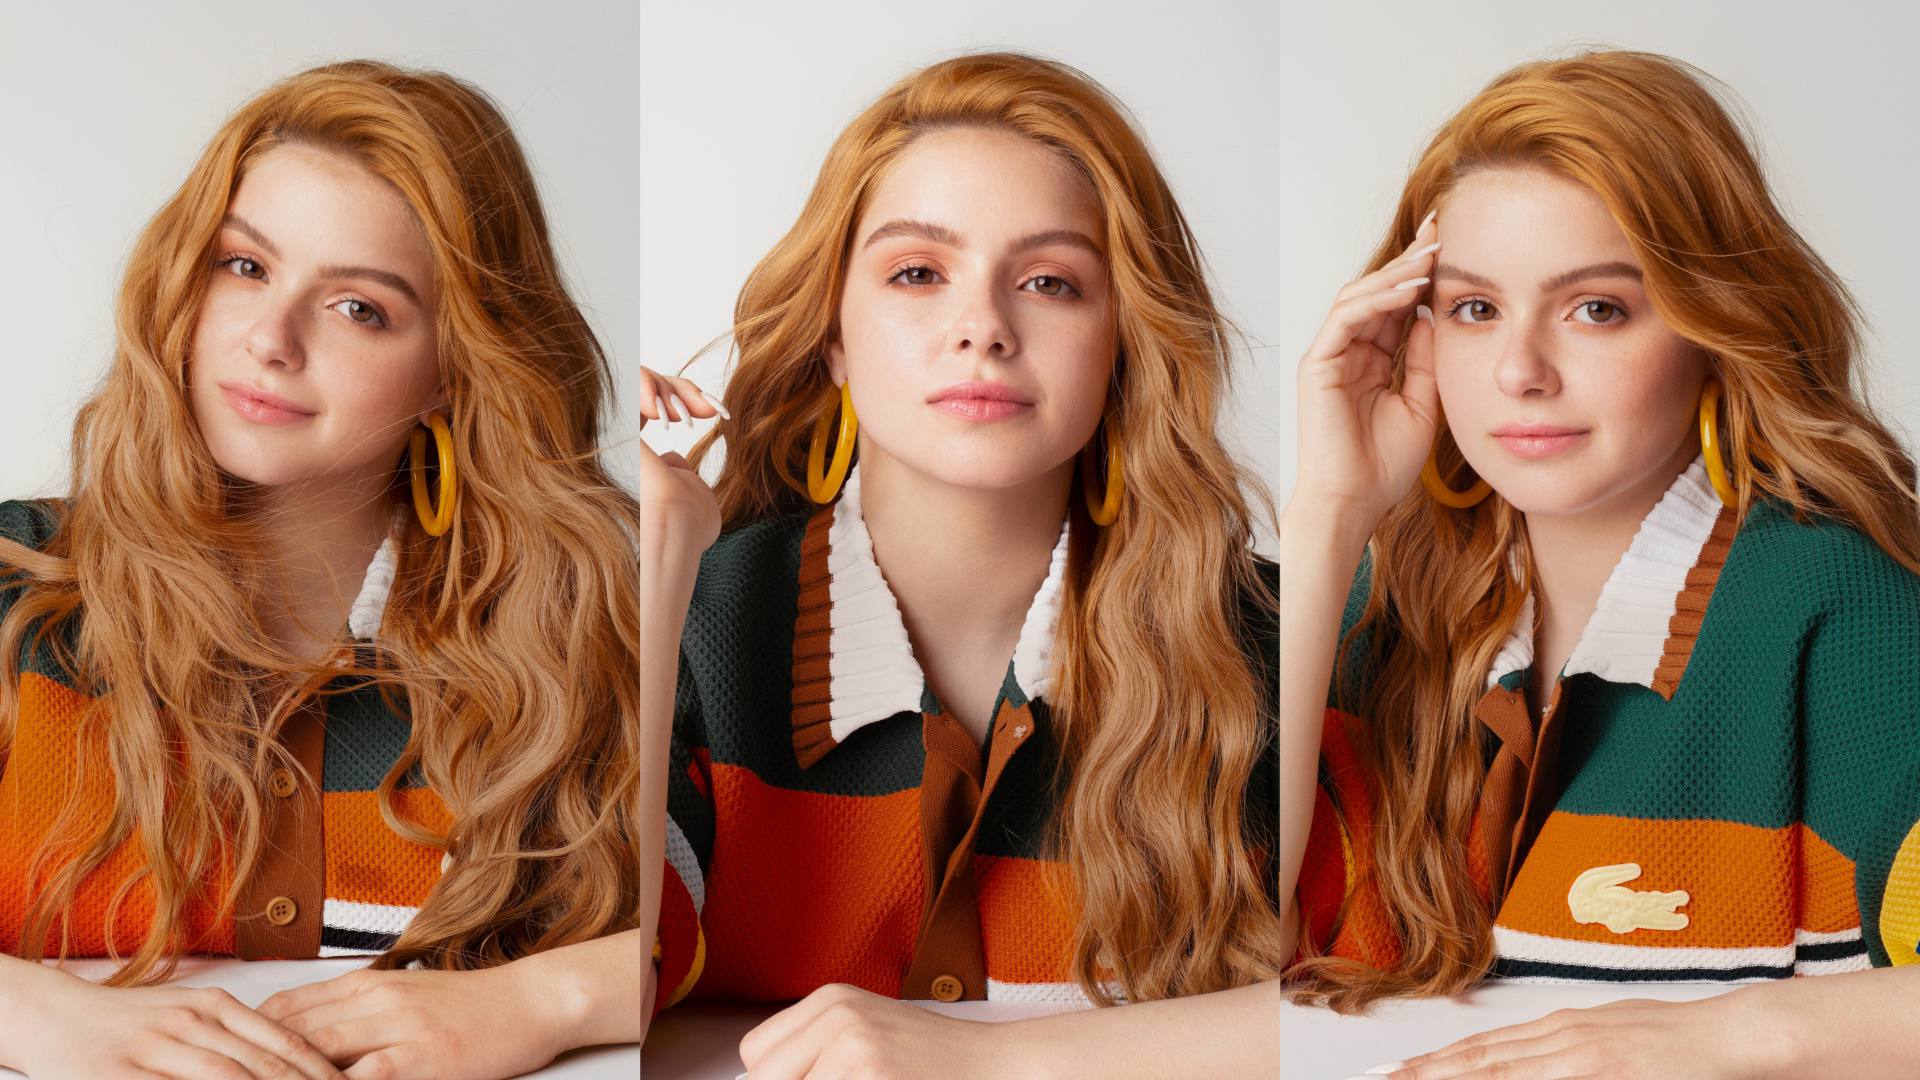 Ariel Winter Beautiful As Redhead In Photoshoot For Teen Vogue Magazine 0002